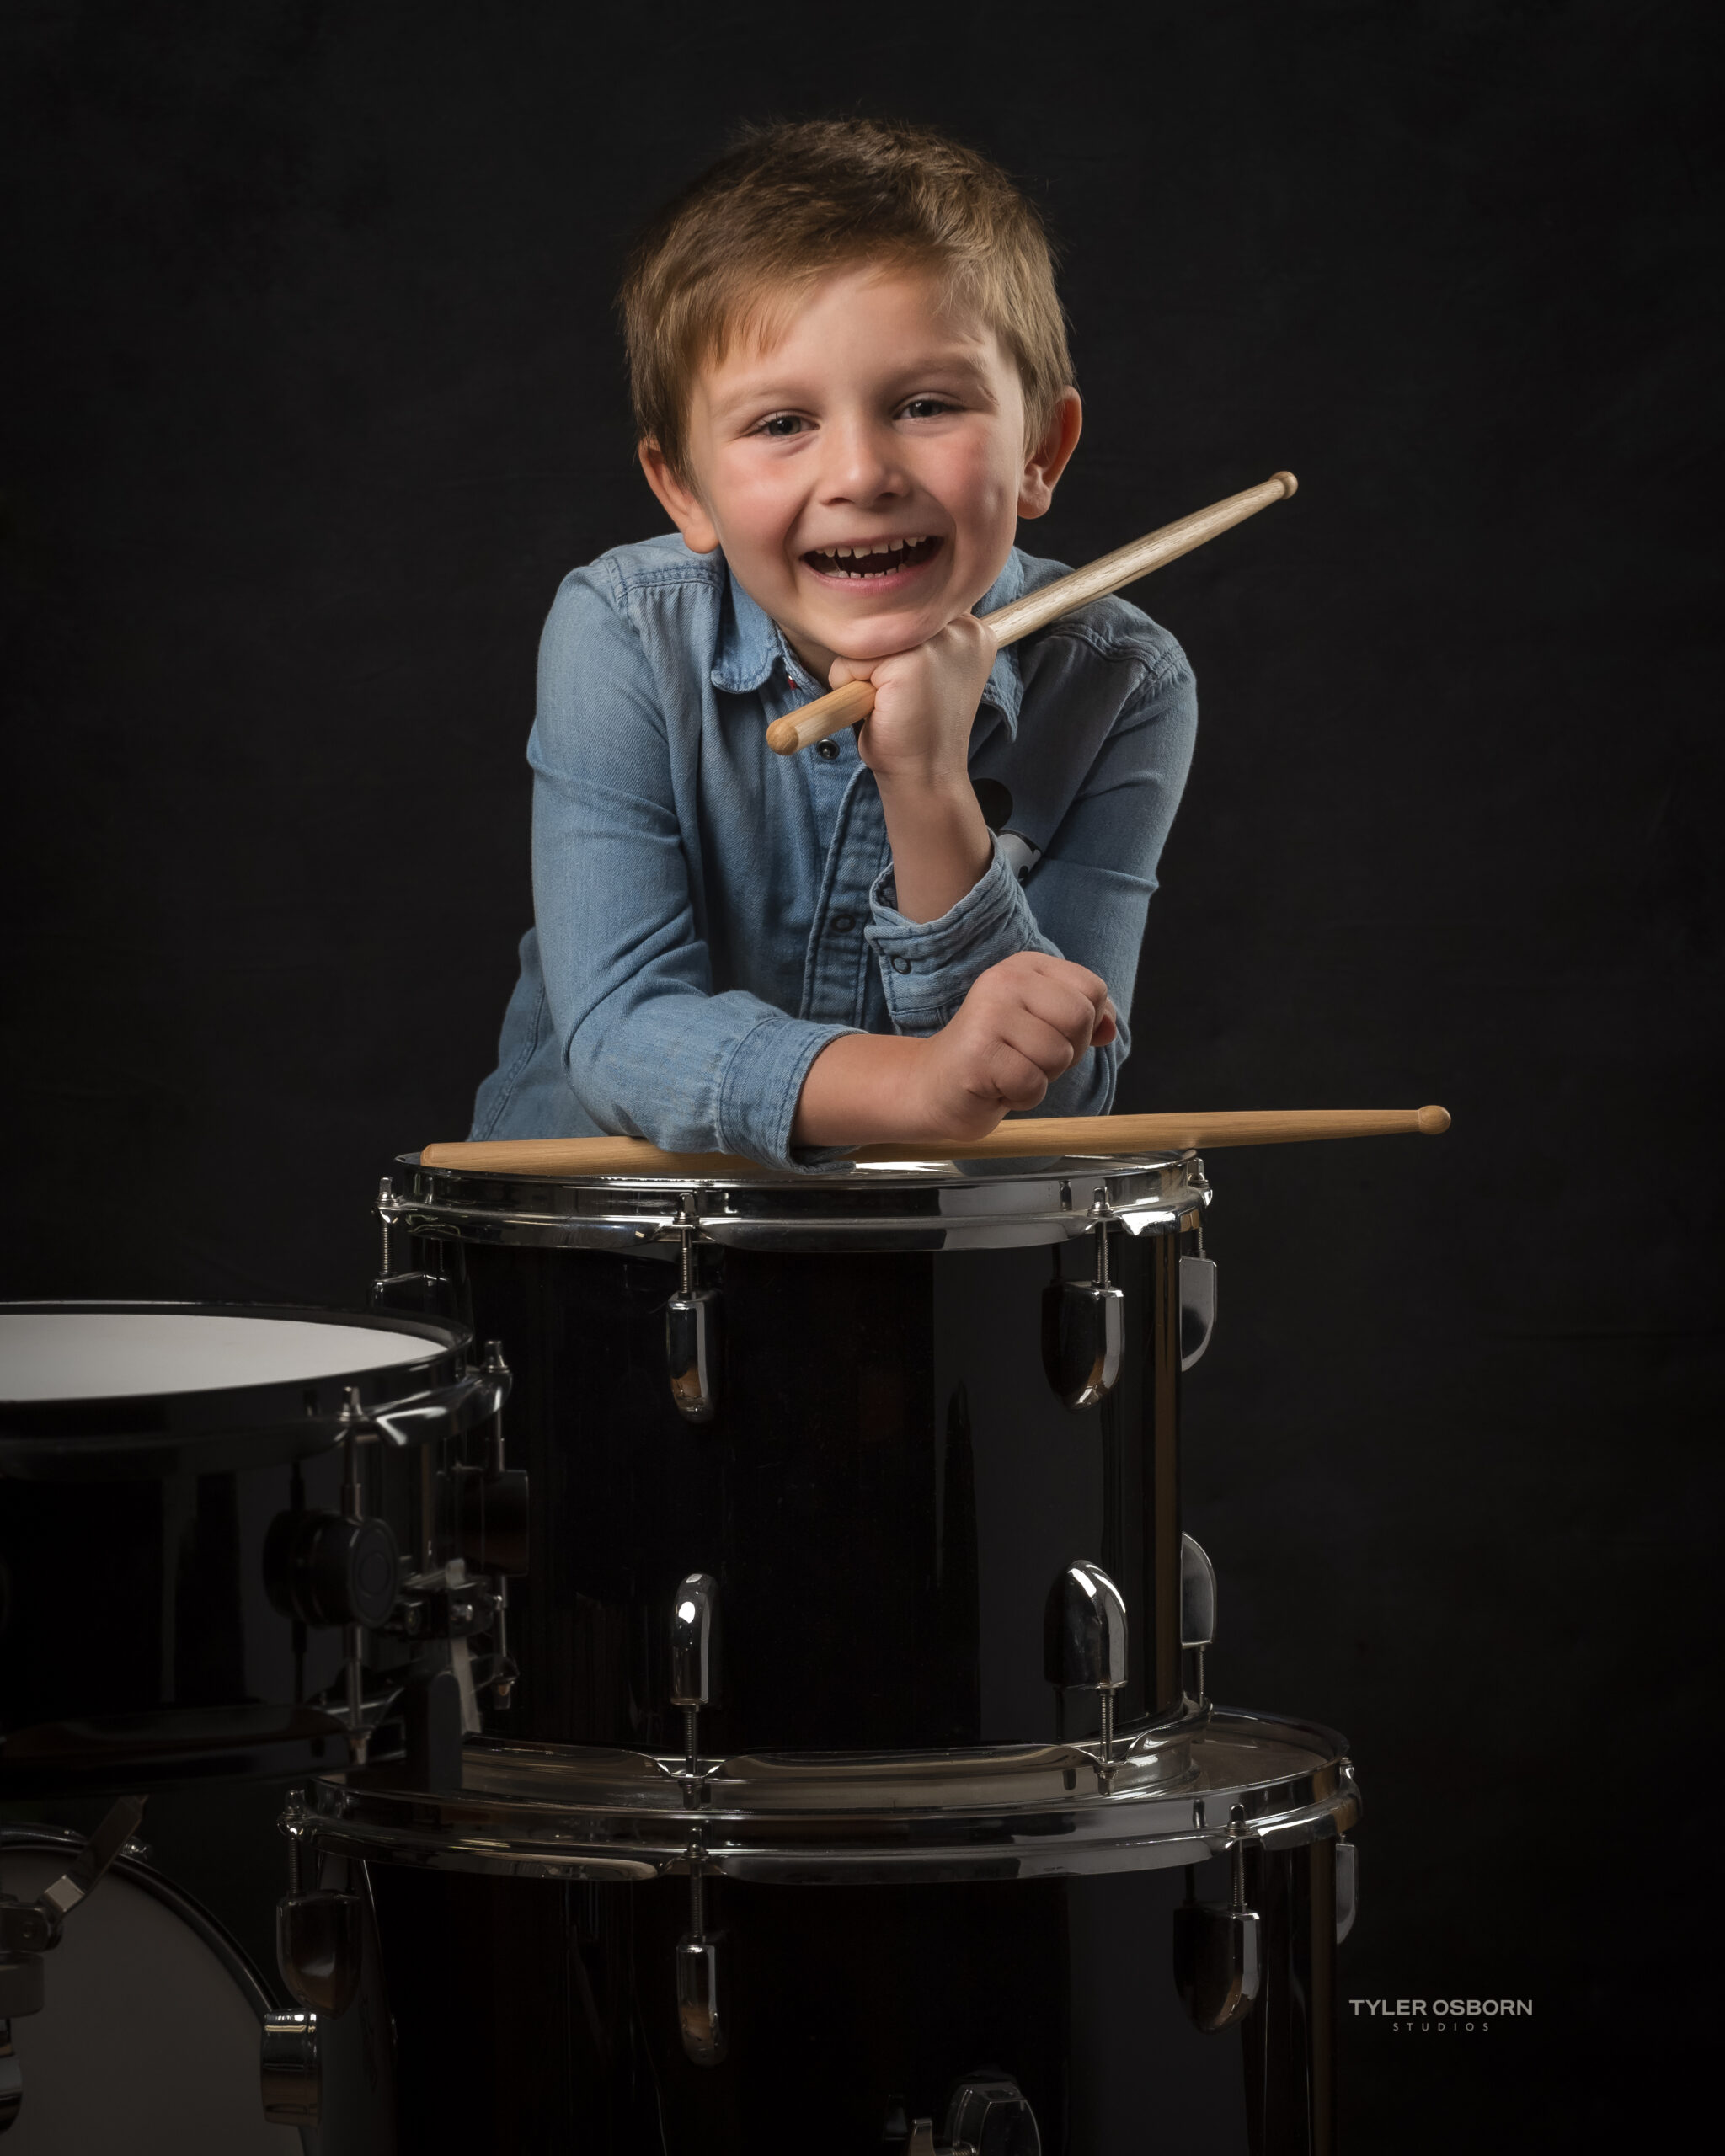 TOS Music lessons near me music store st joseph mo guitar lessons near me piano lessons st joseph mo drum lessons near me violin lessons